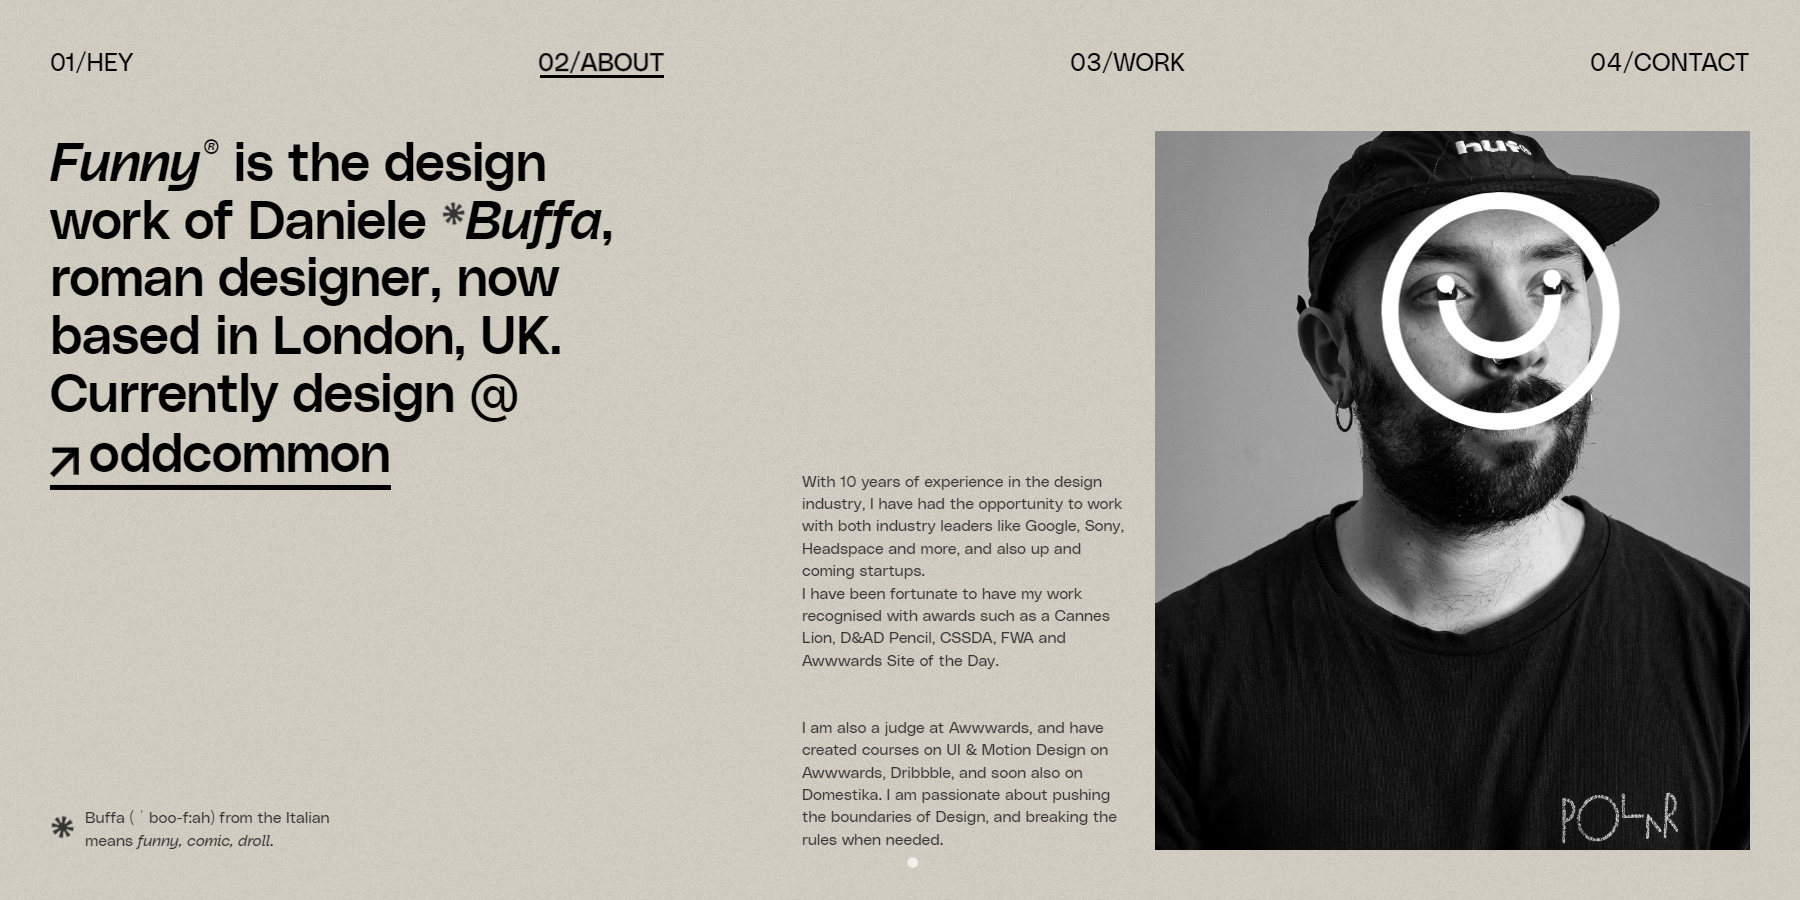 Design is Funny - Website of the Day